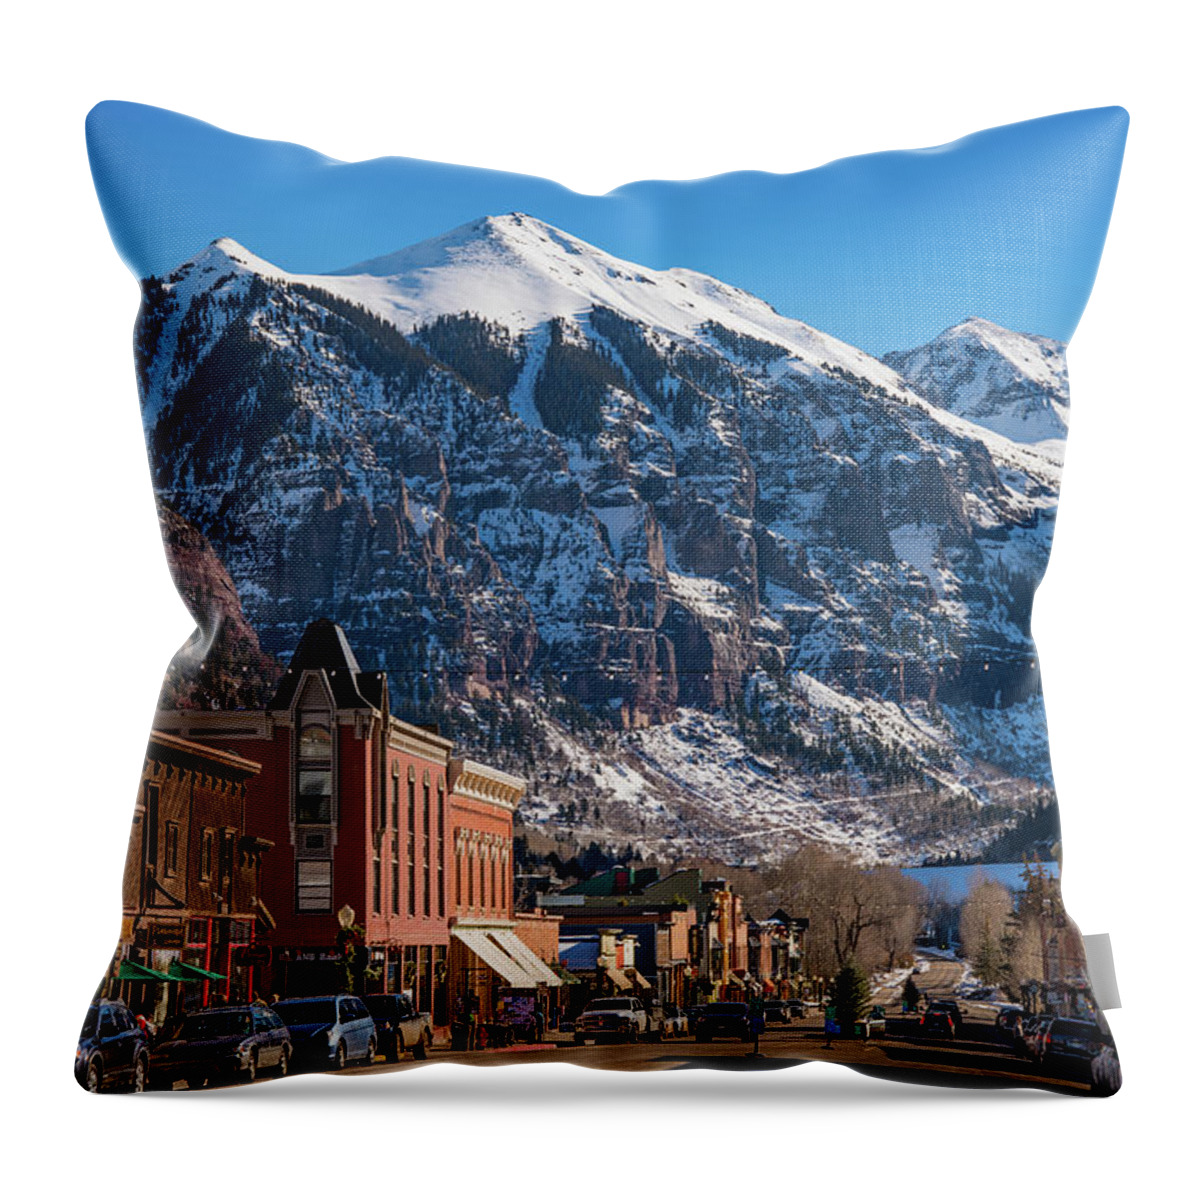 Colorado Throw Pillow featuring the photograph Downtown Telluride by Darren White